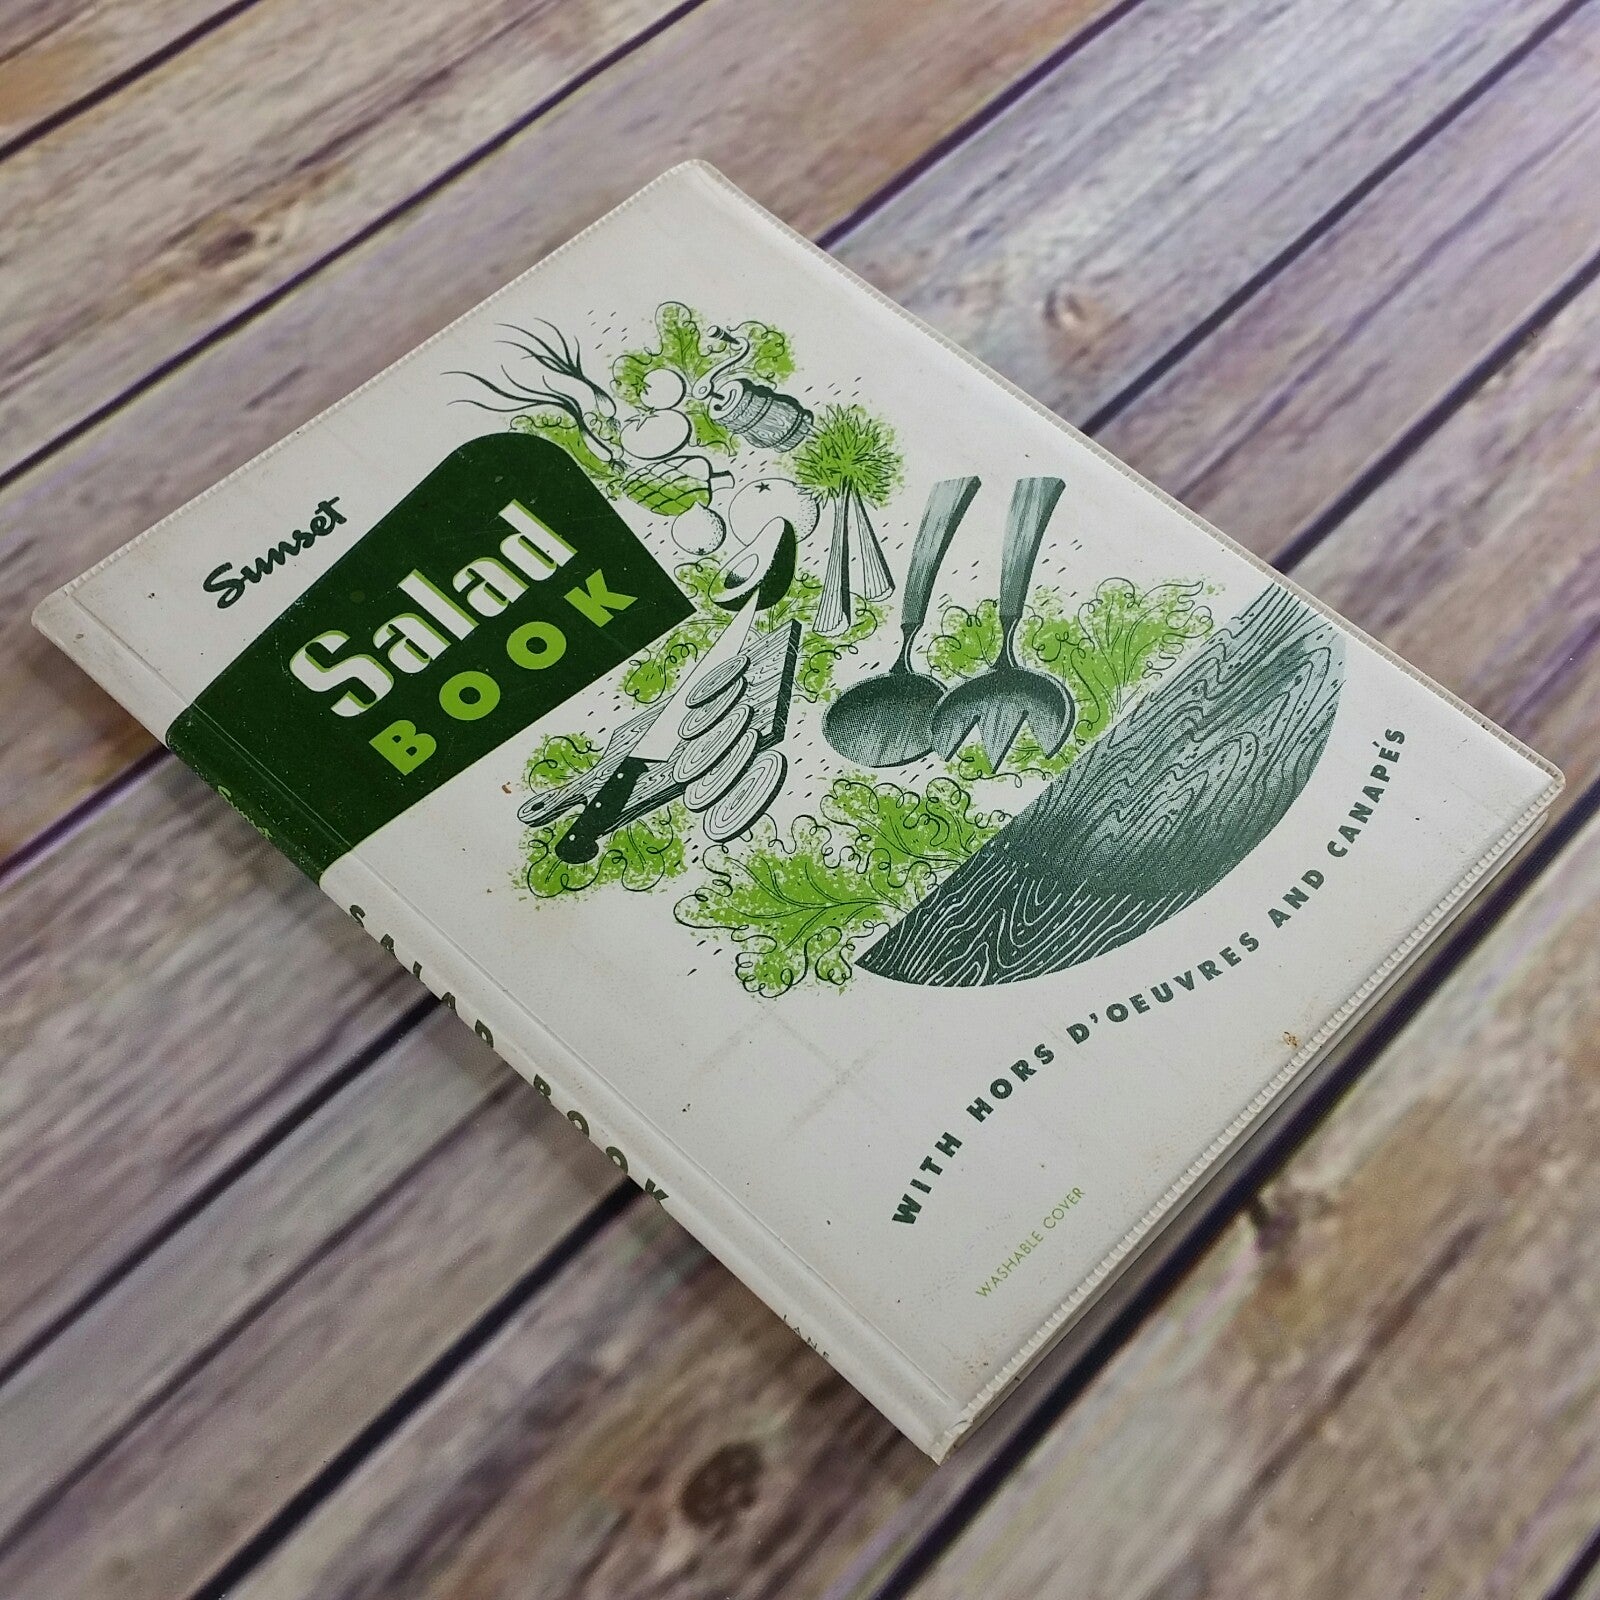 Vintage Cookbook Sunset Salad Book Recipes 1957 Eighth Printing Washable Cover Salads Hors D'oeuvres and Canapes - At Grandma's Table